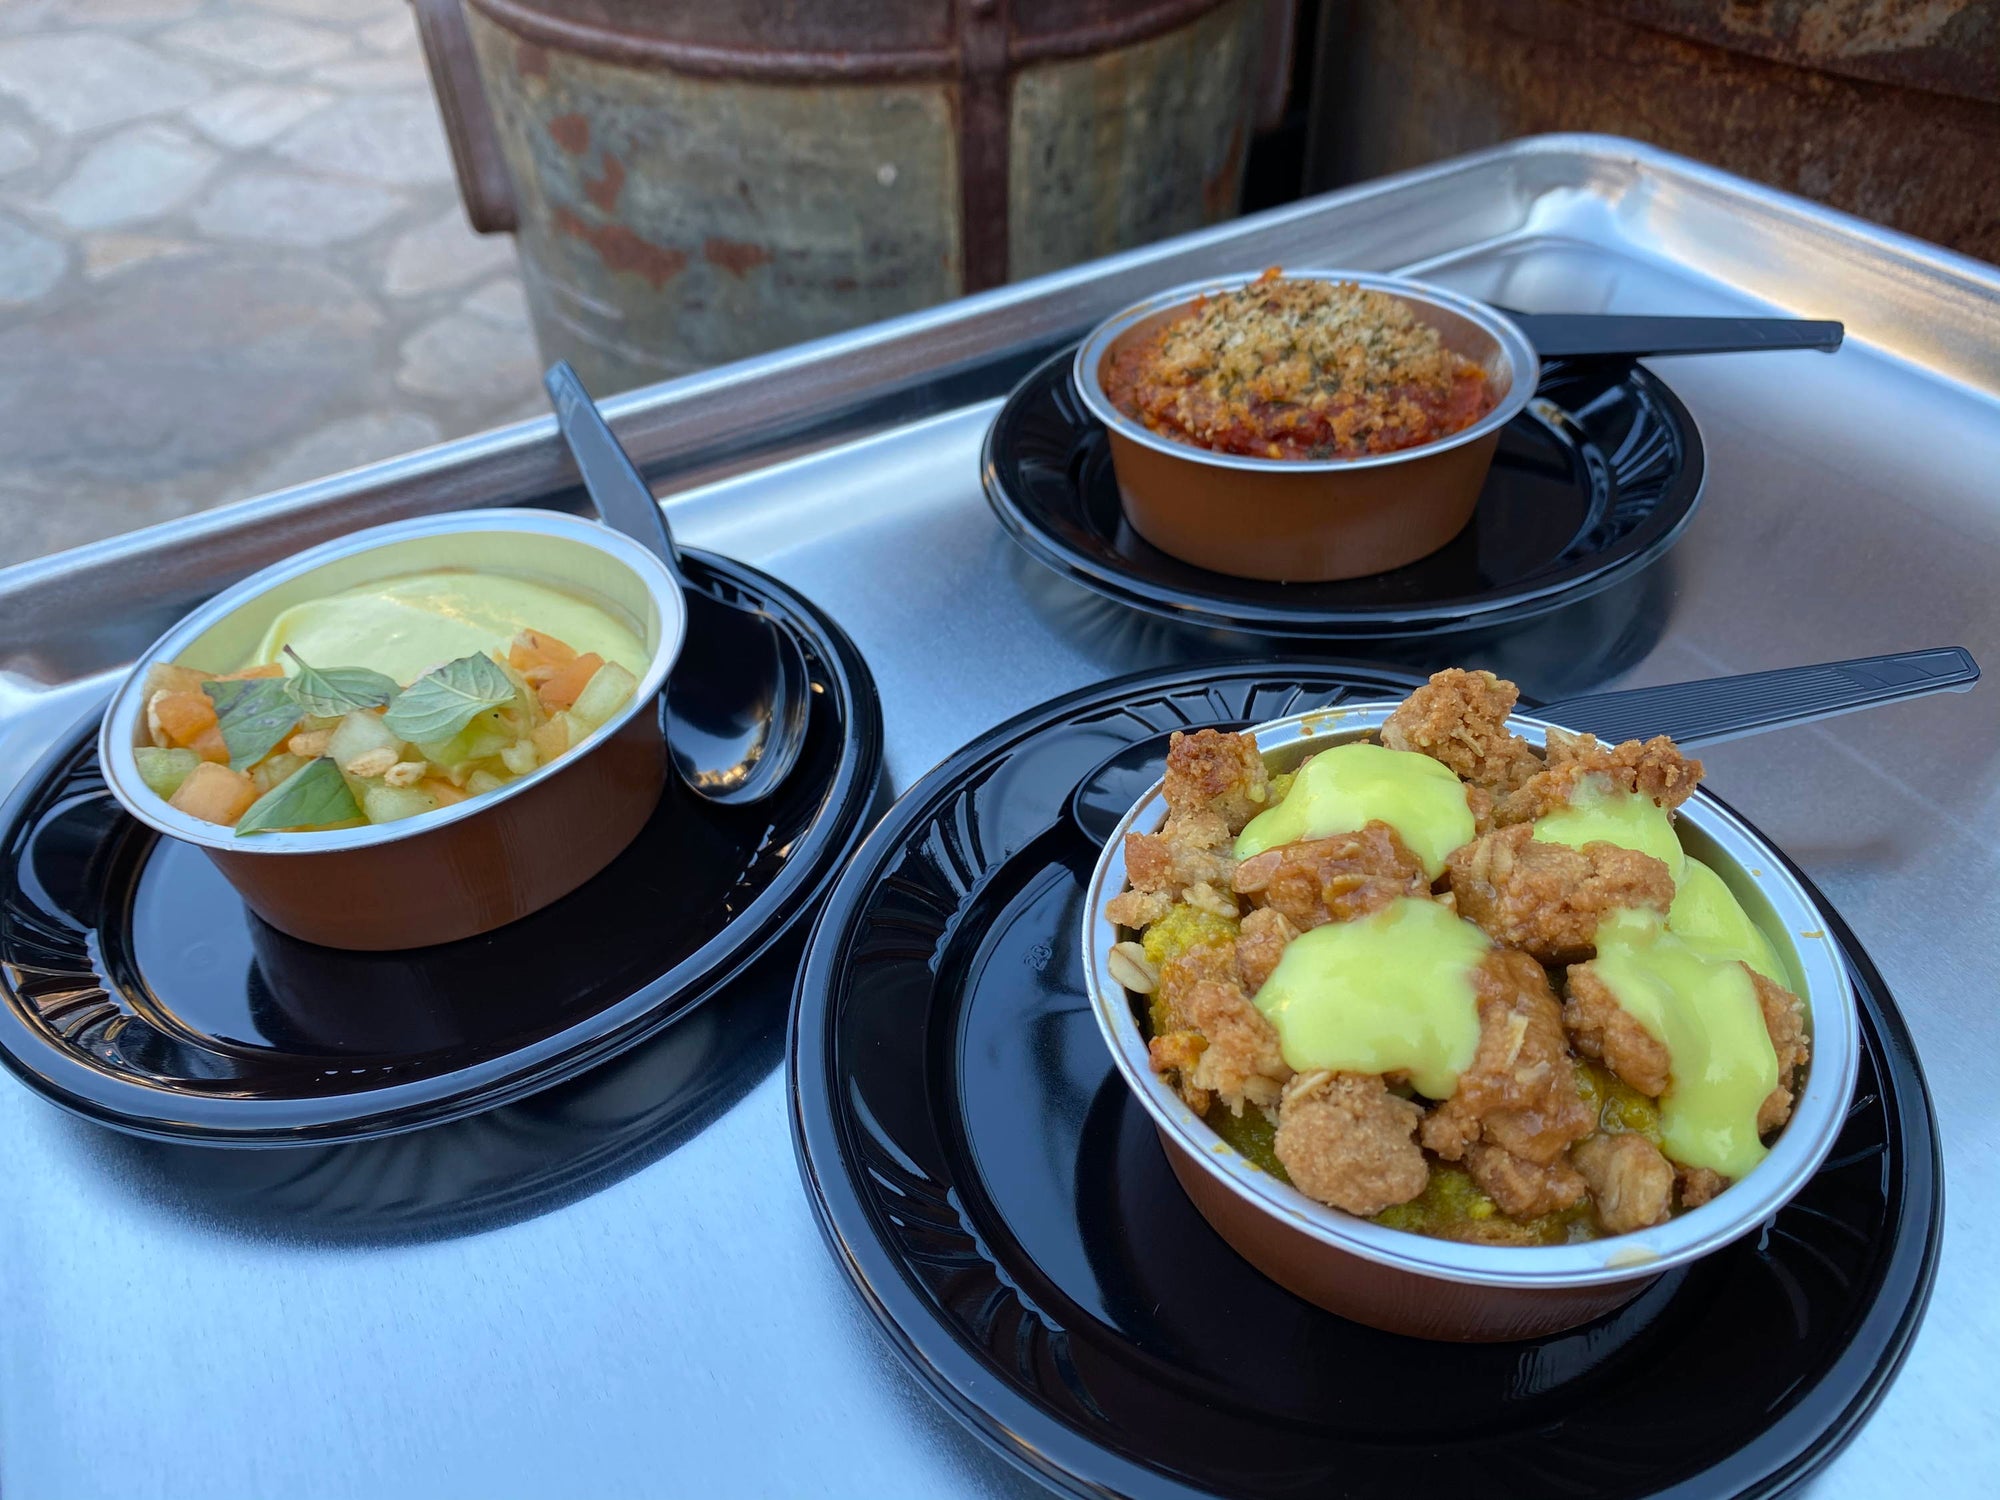 Review: Breakfast at the Milk Stand in Star Wars: Galaxy's Edge